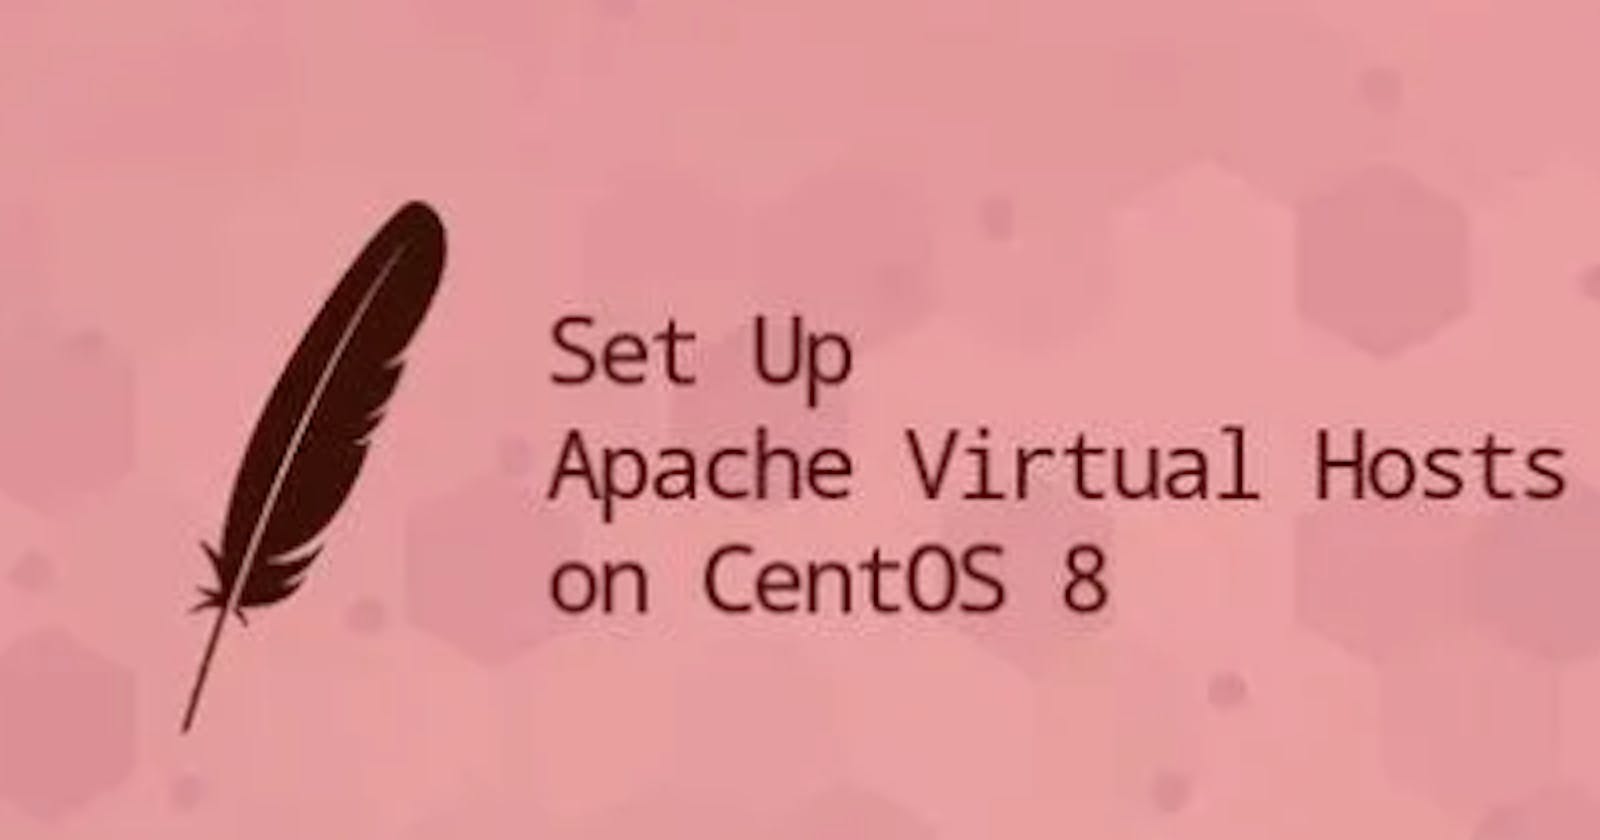 How to Set Up Apache Virtual Hosts on CentOS 8